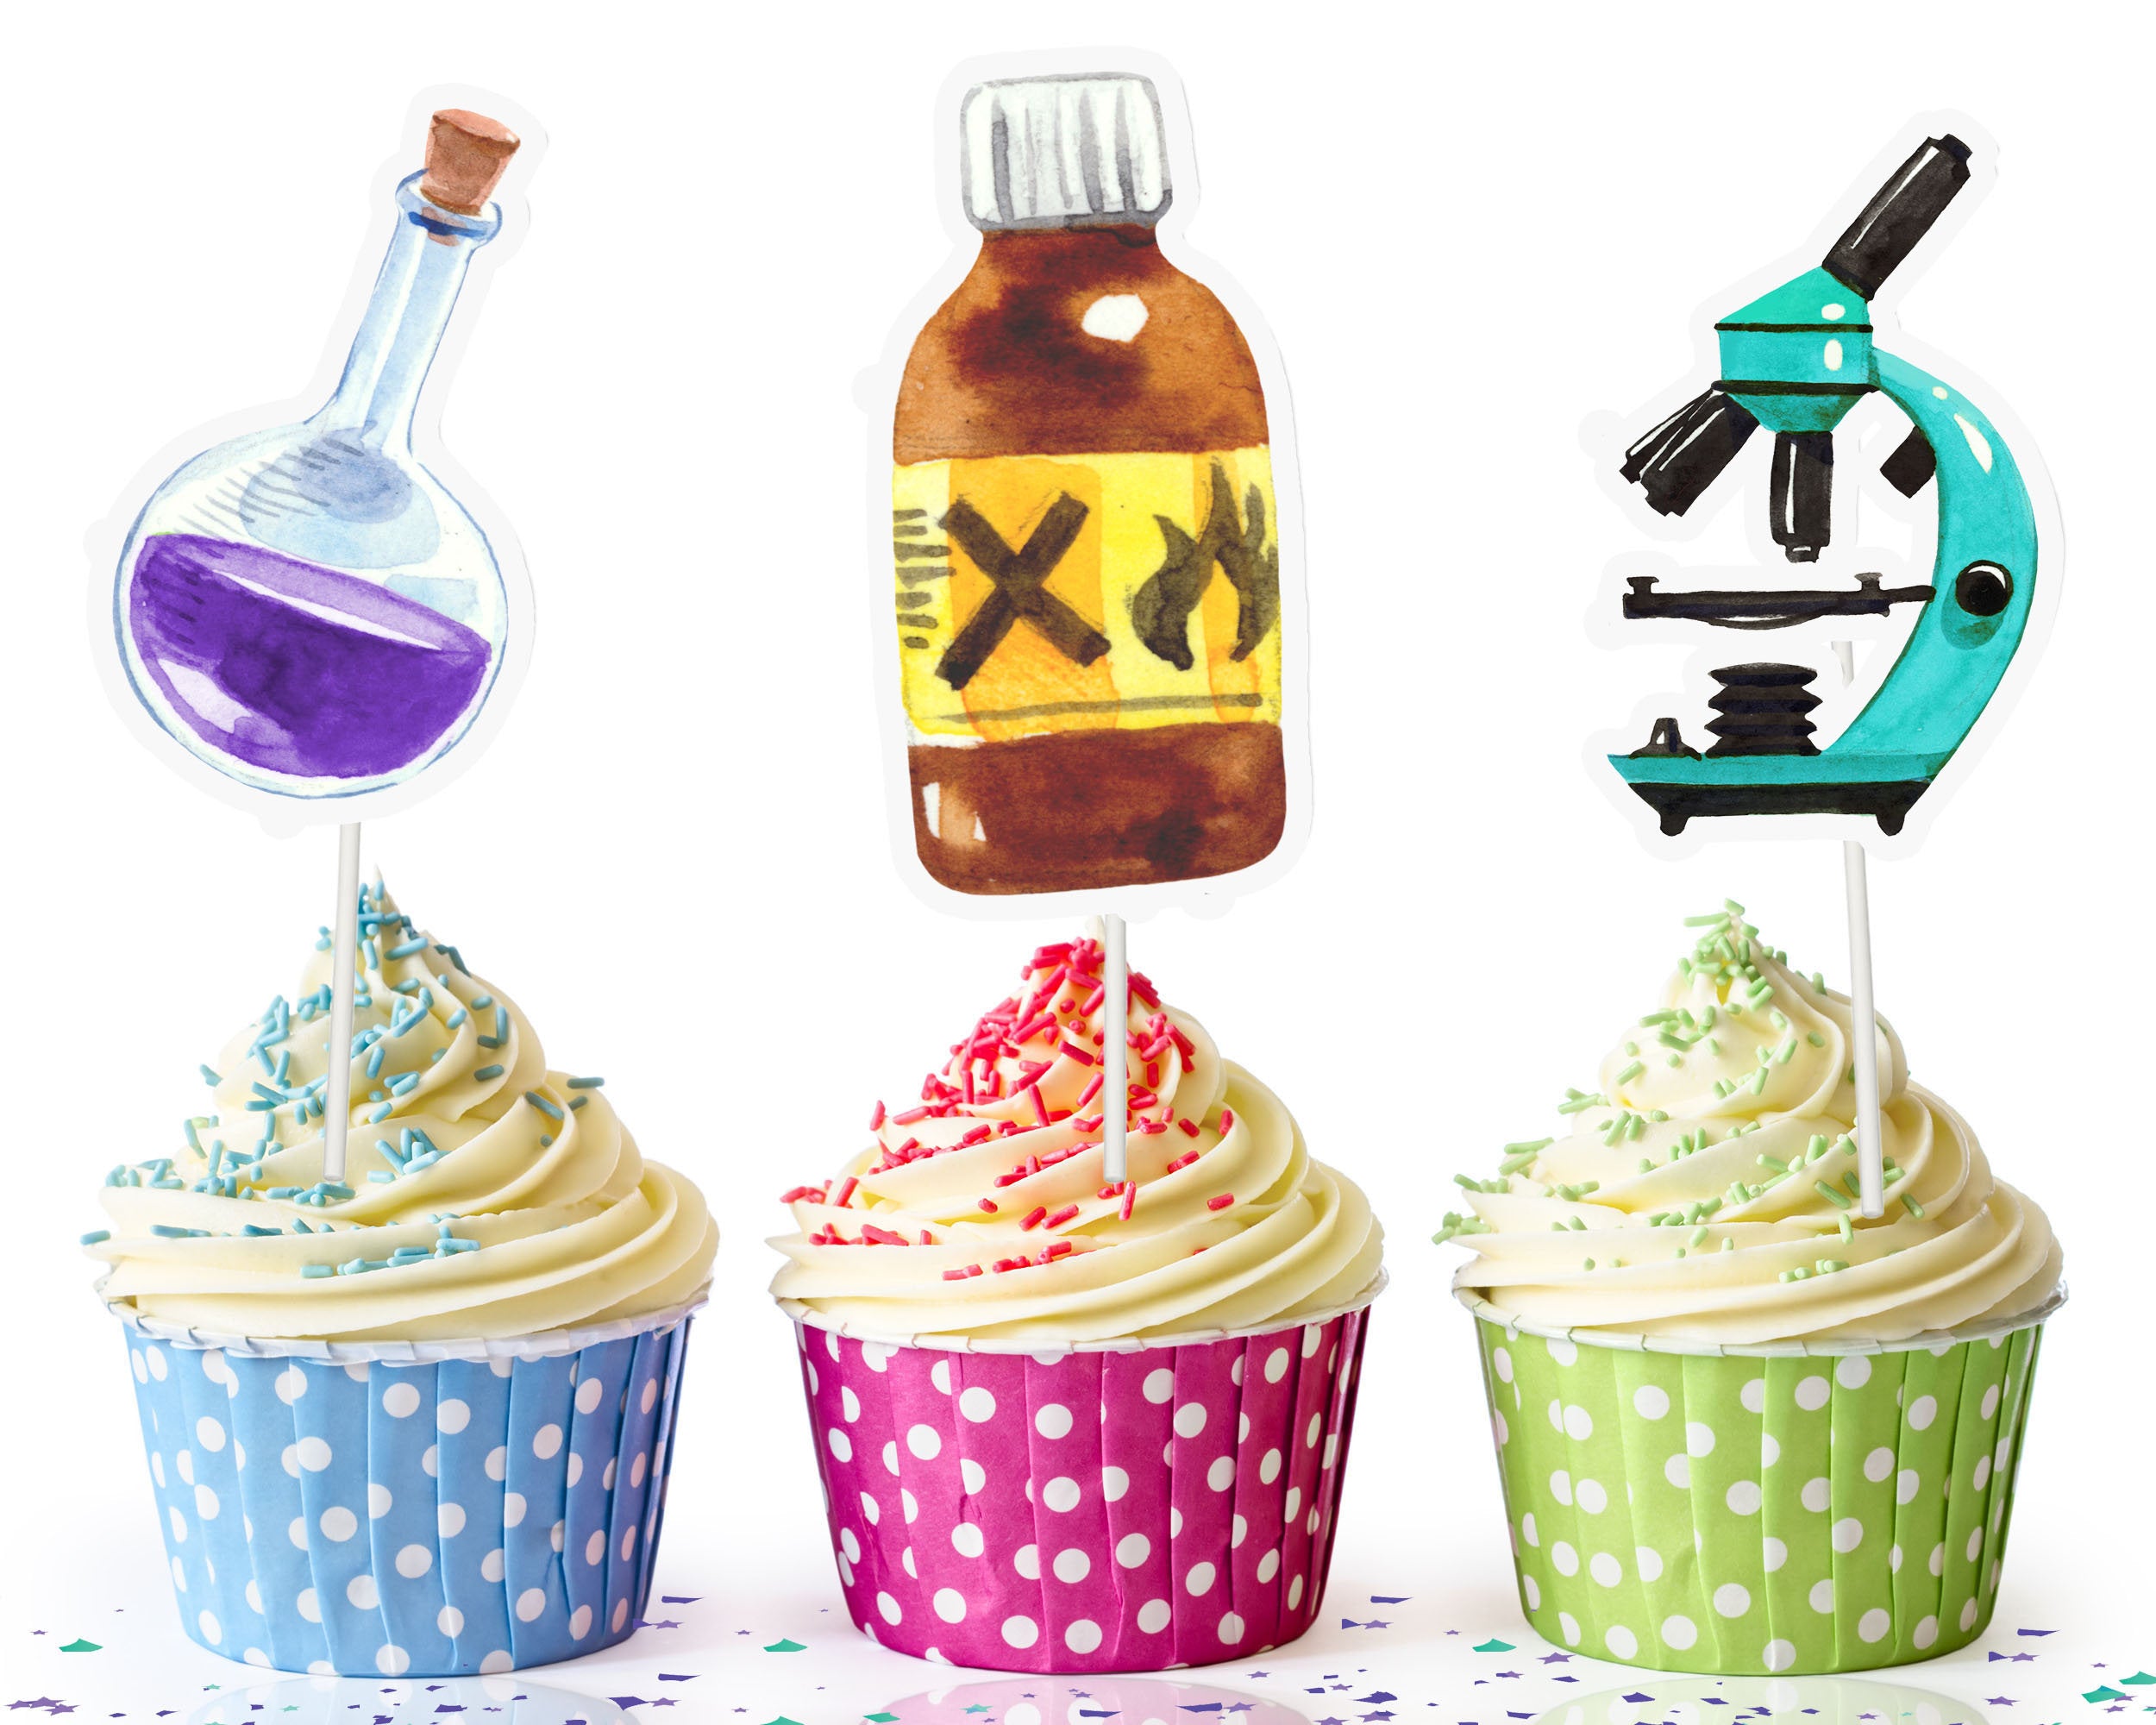 Eureka! Science Cupcake Toppers - Celebrate Discovery and Innovation